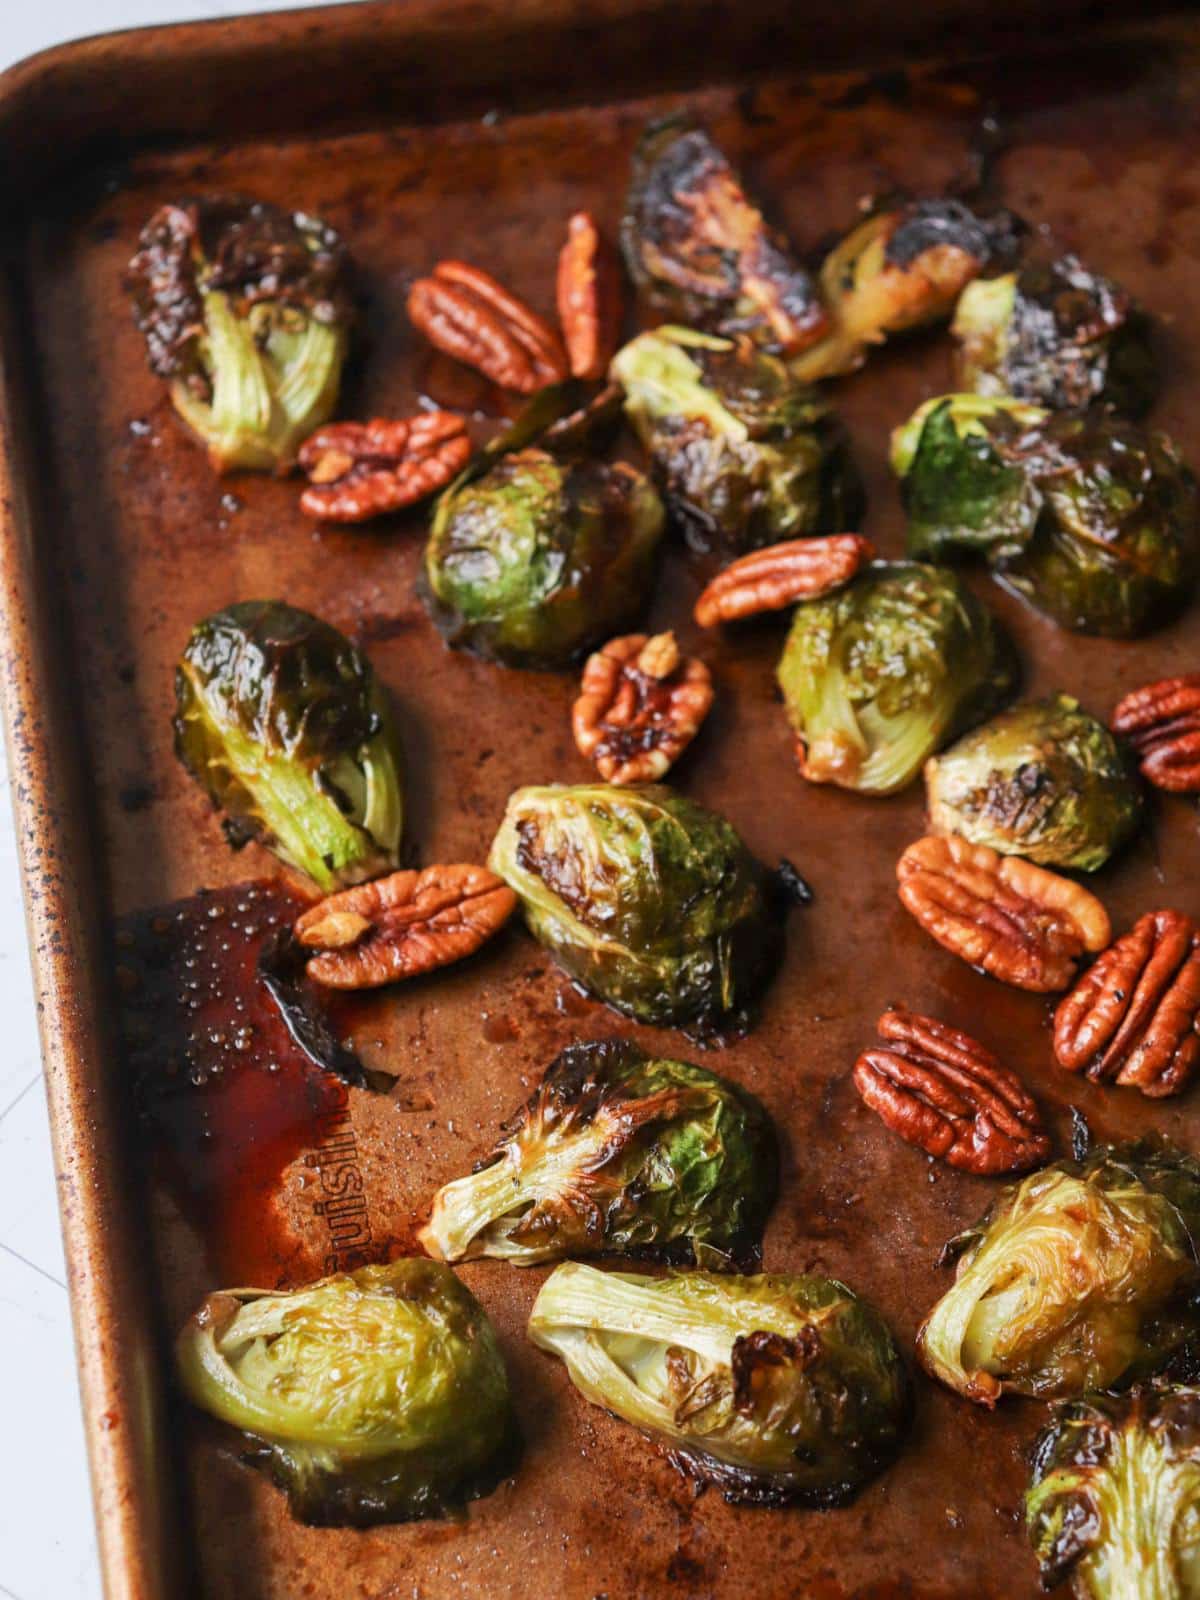 Maple balsamic candied brussel sprouts on a baking tray after being roasted.